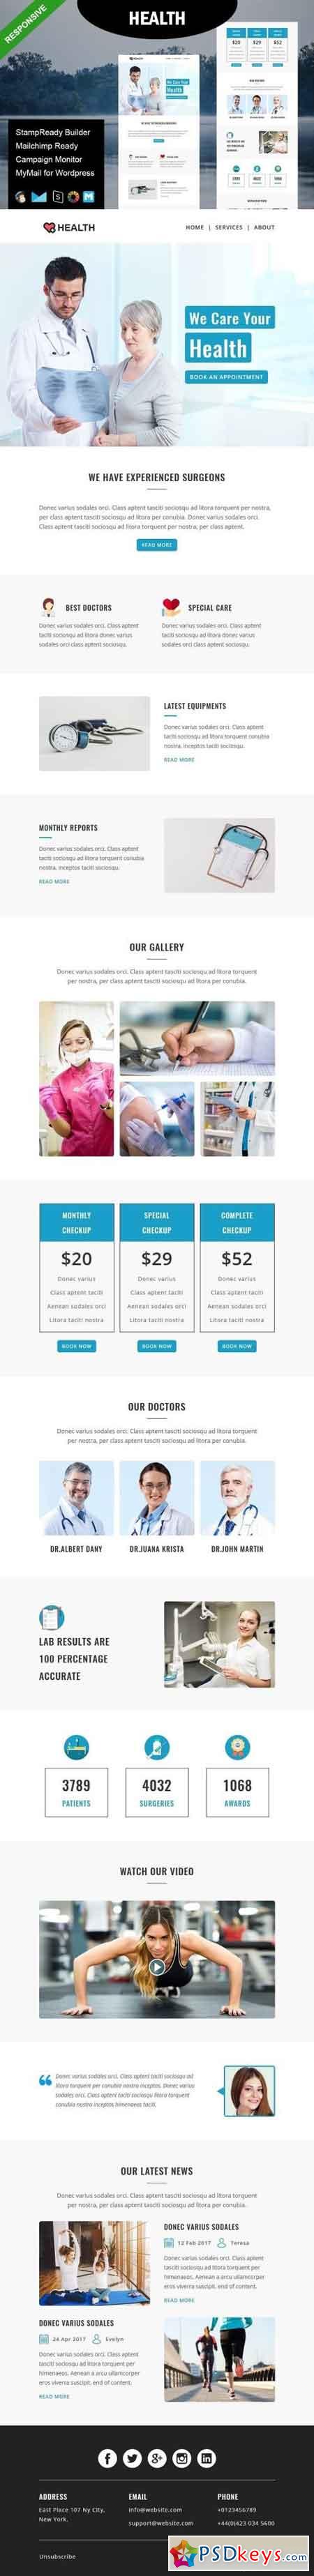 HEALTH- Responsive Email Template 1590127